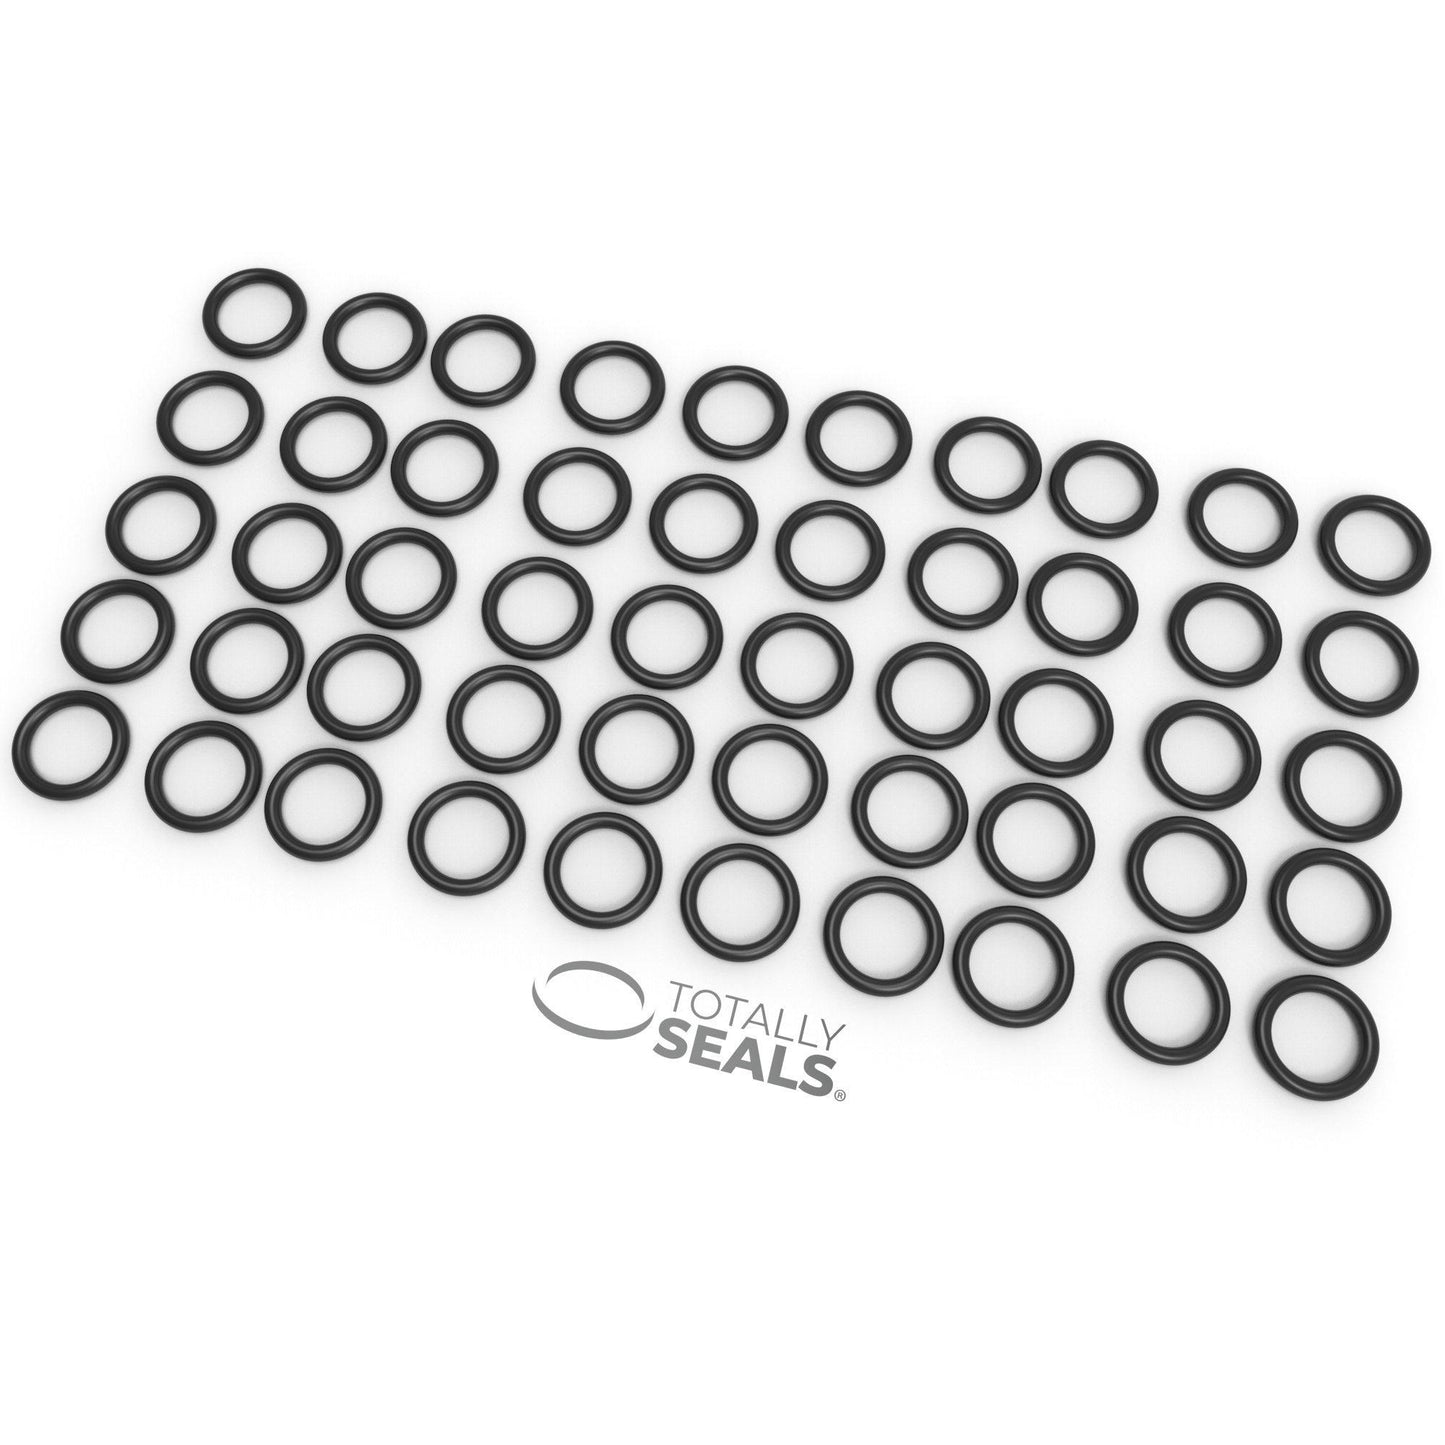 7mm x 1.5mm (10mm OD) Nitrile O-Rings - Totally Seals®